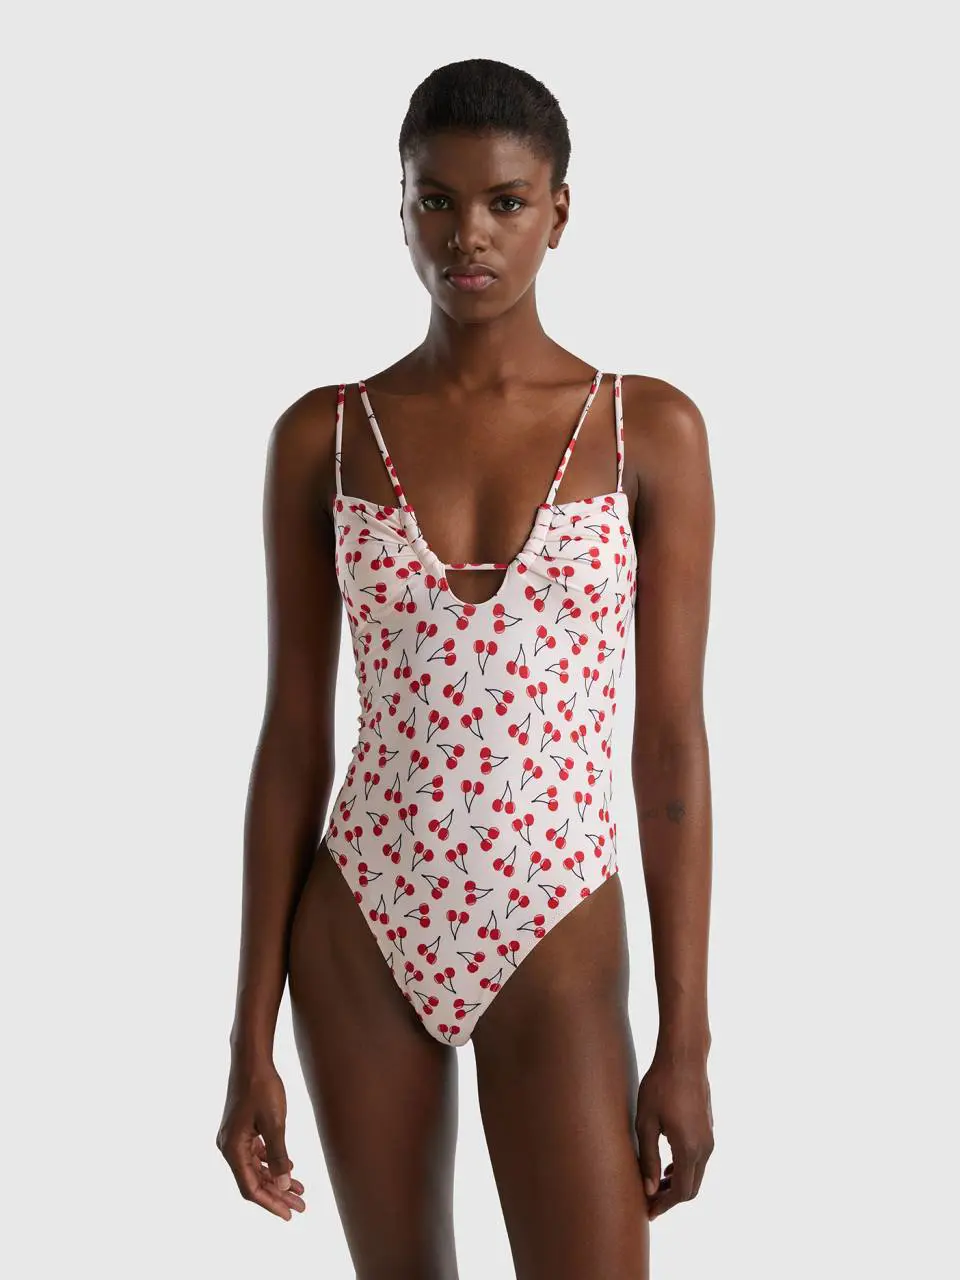 Benetton pink one-piece swimsuit with cherry pattern. 1